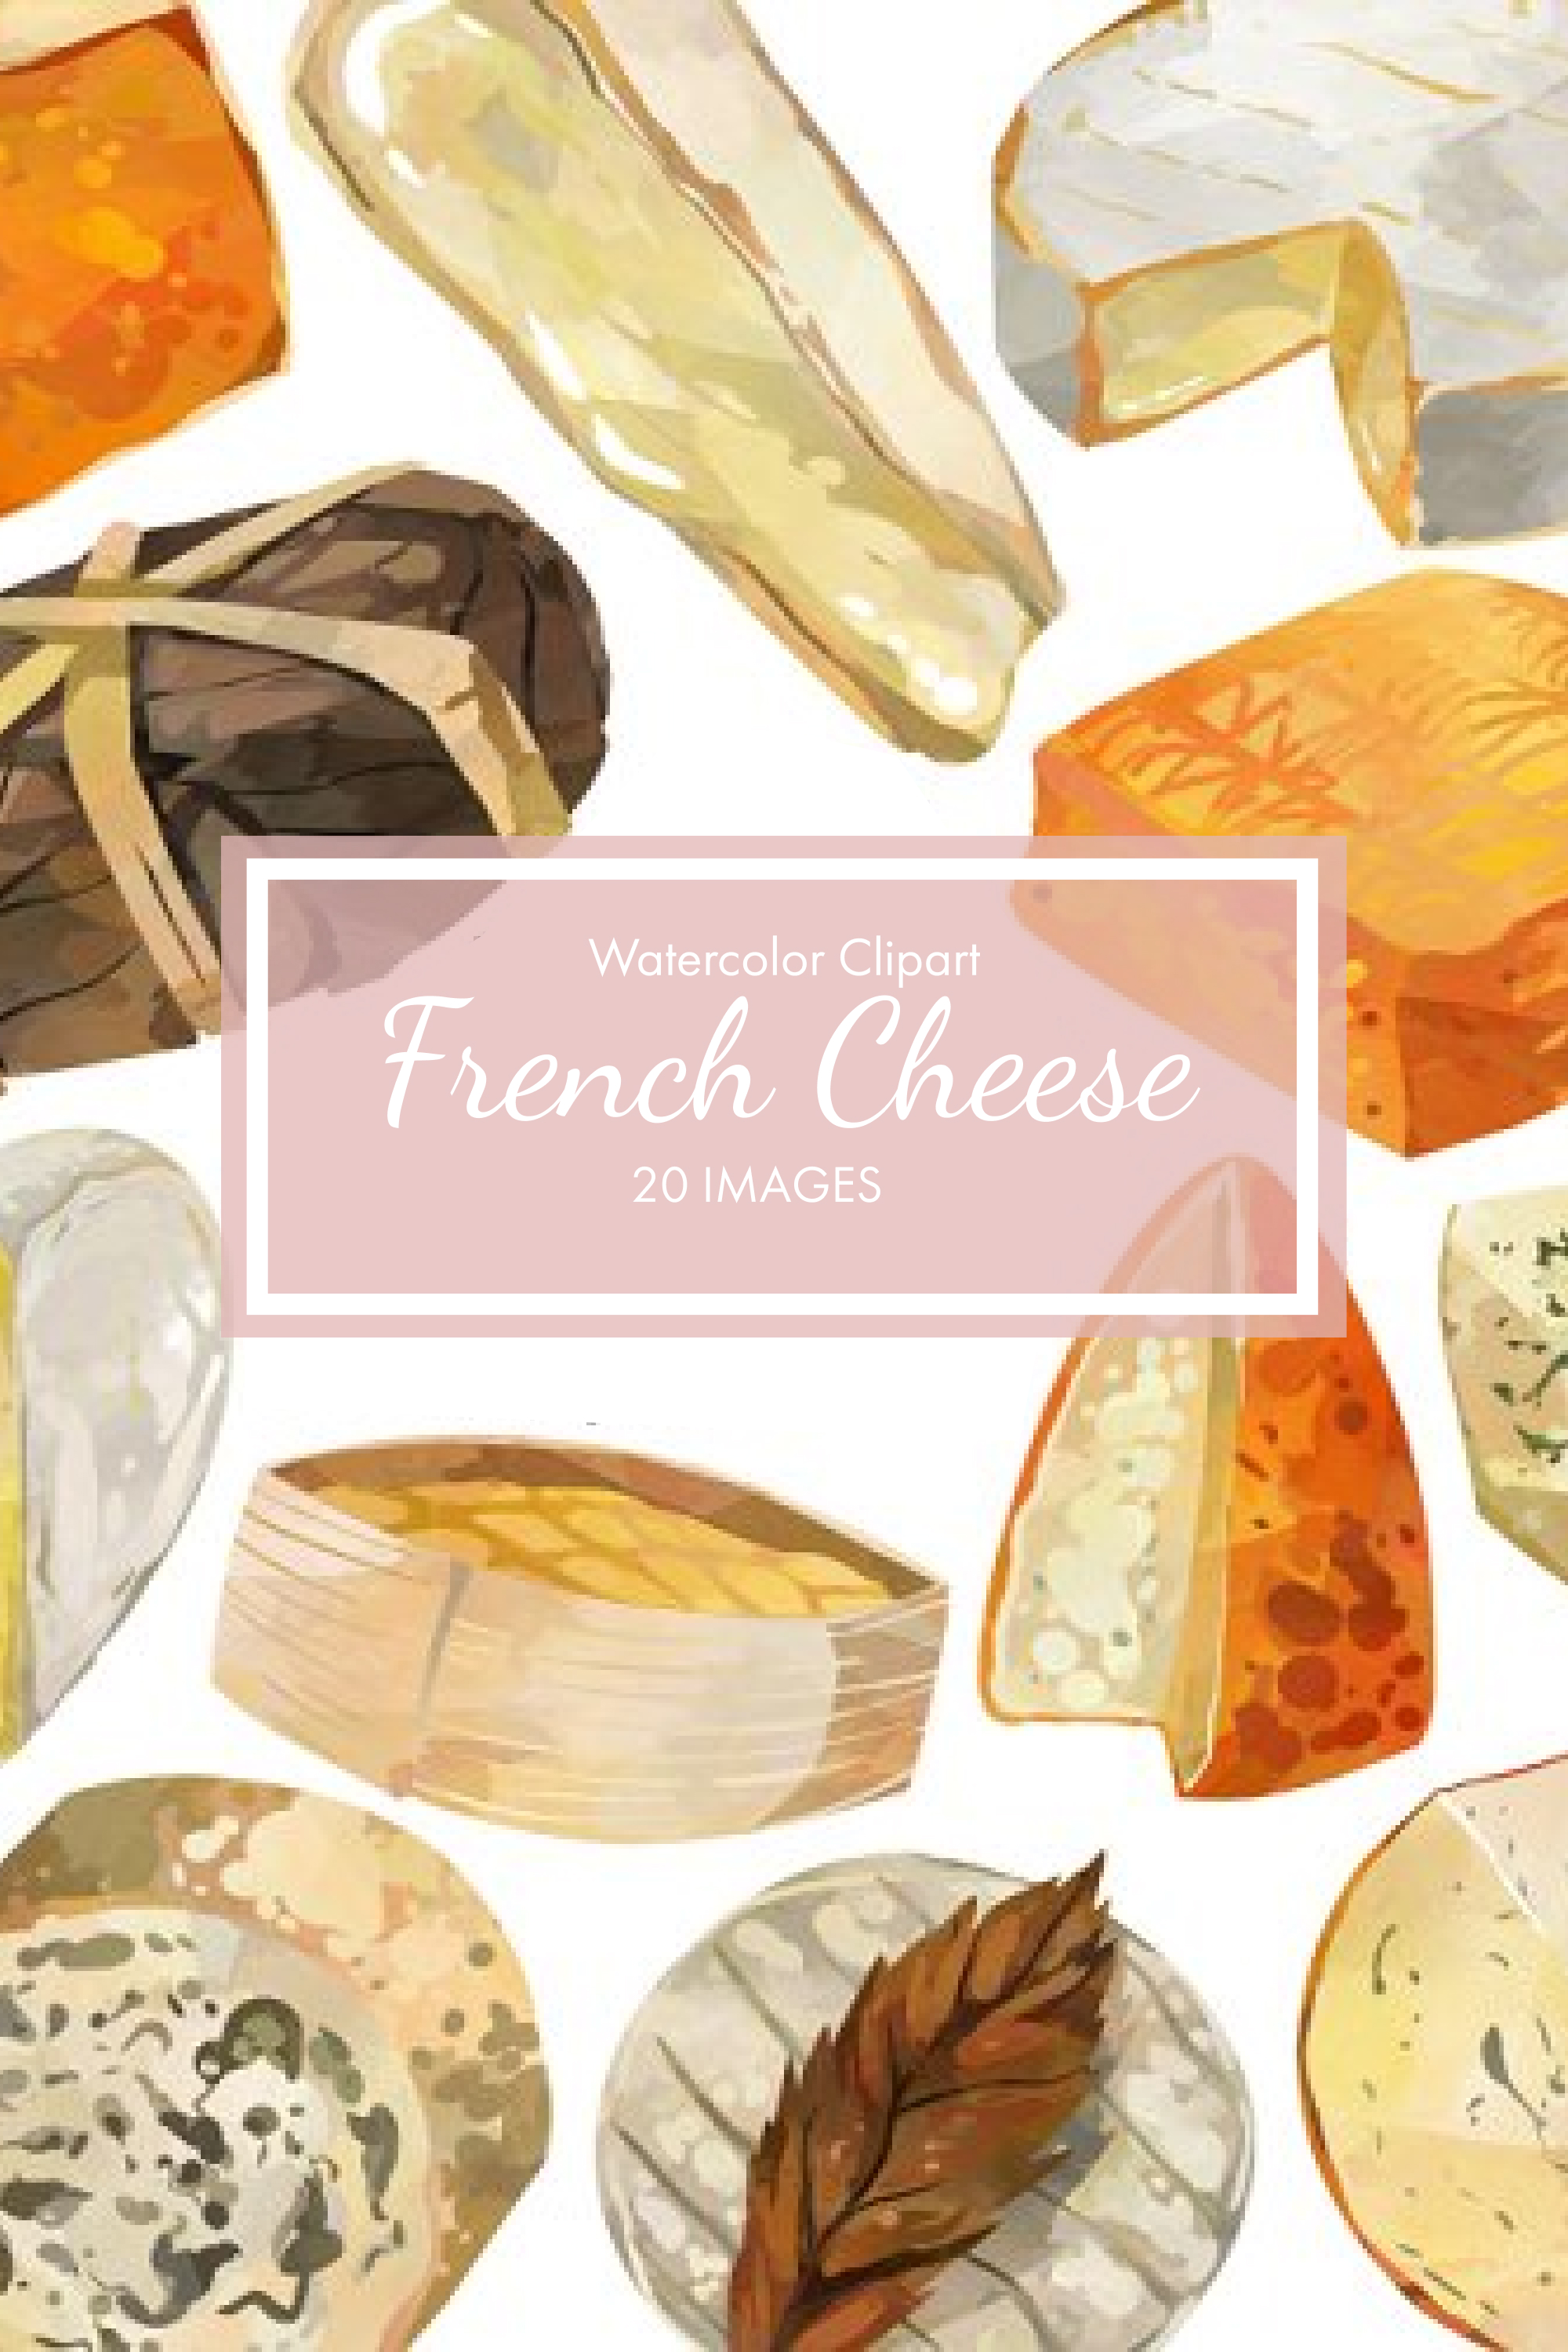 Set of bright vintage images of hard cheeses.